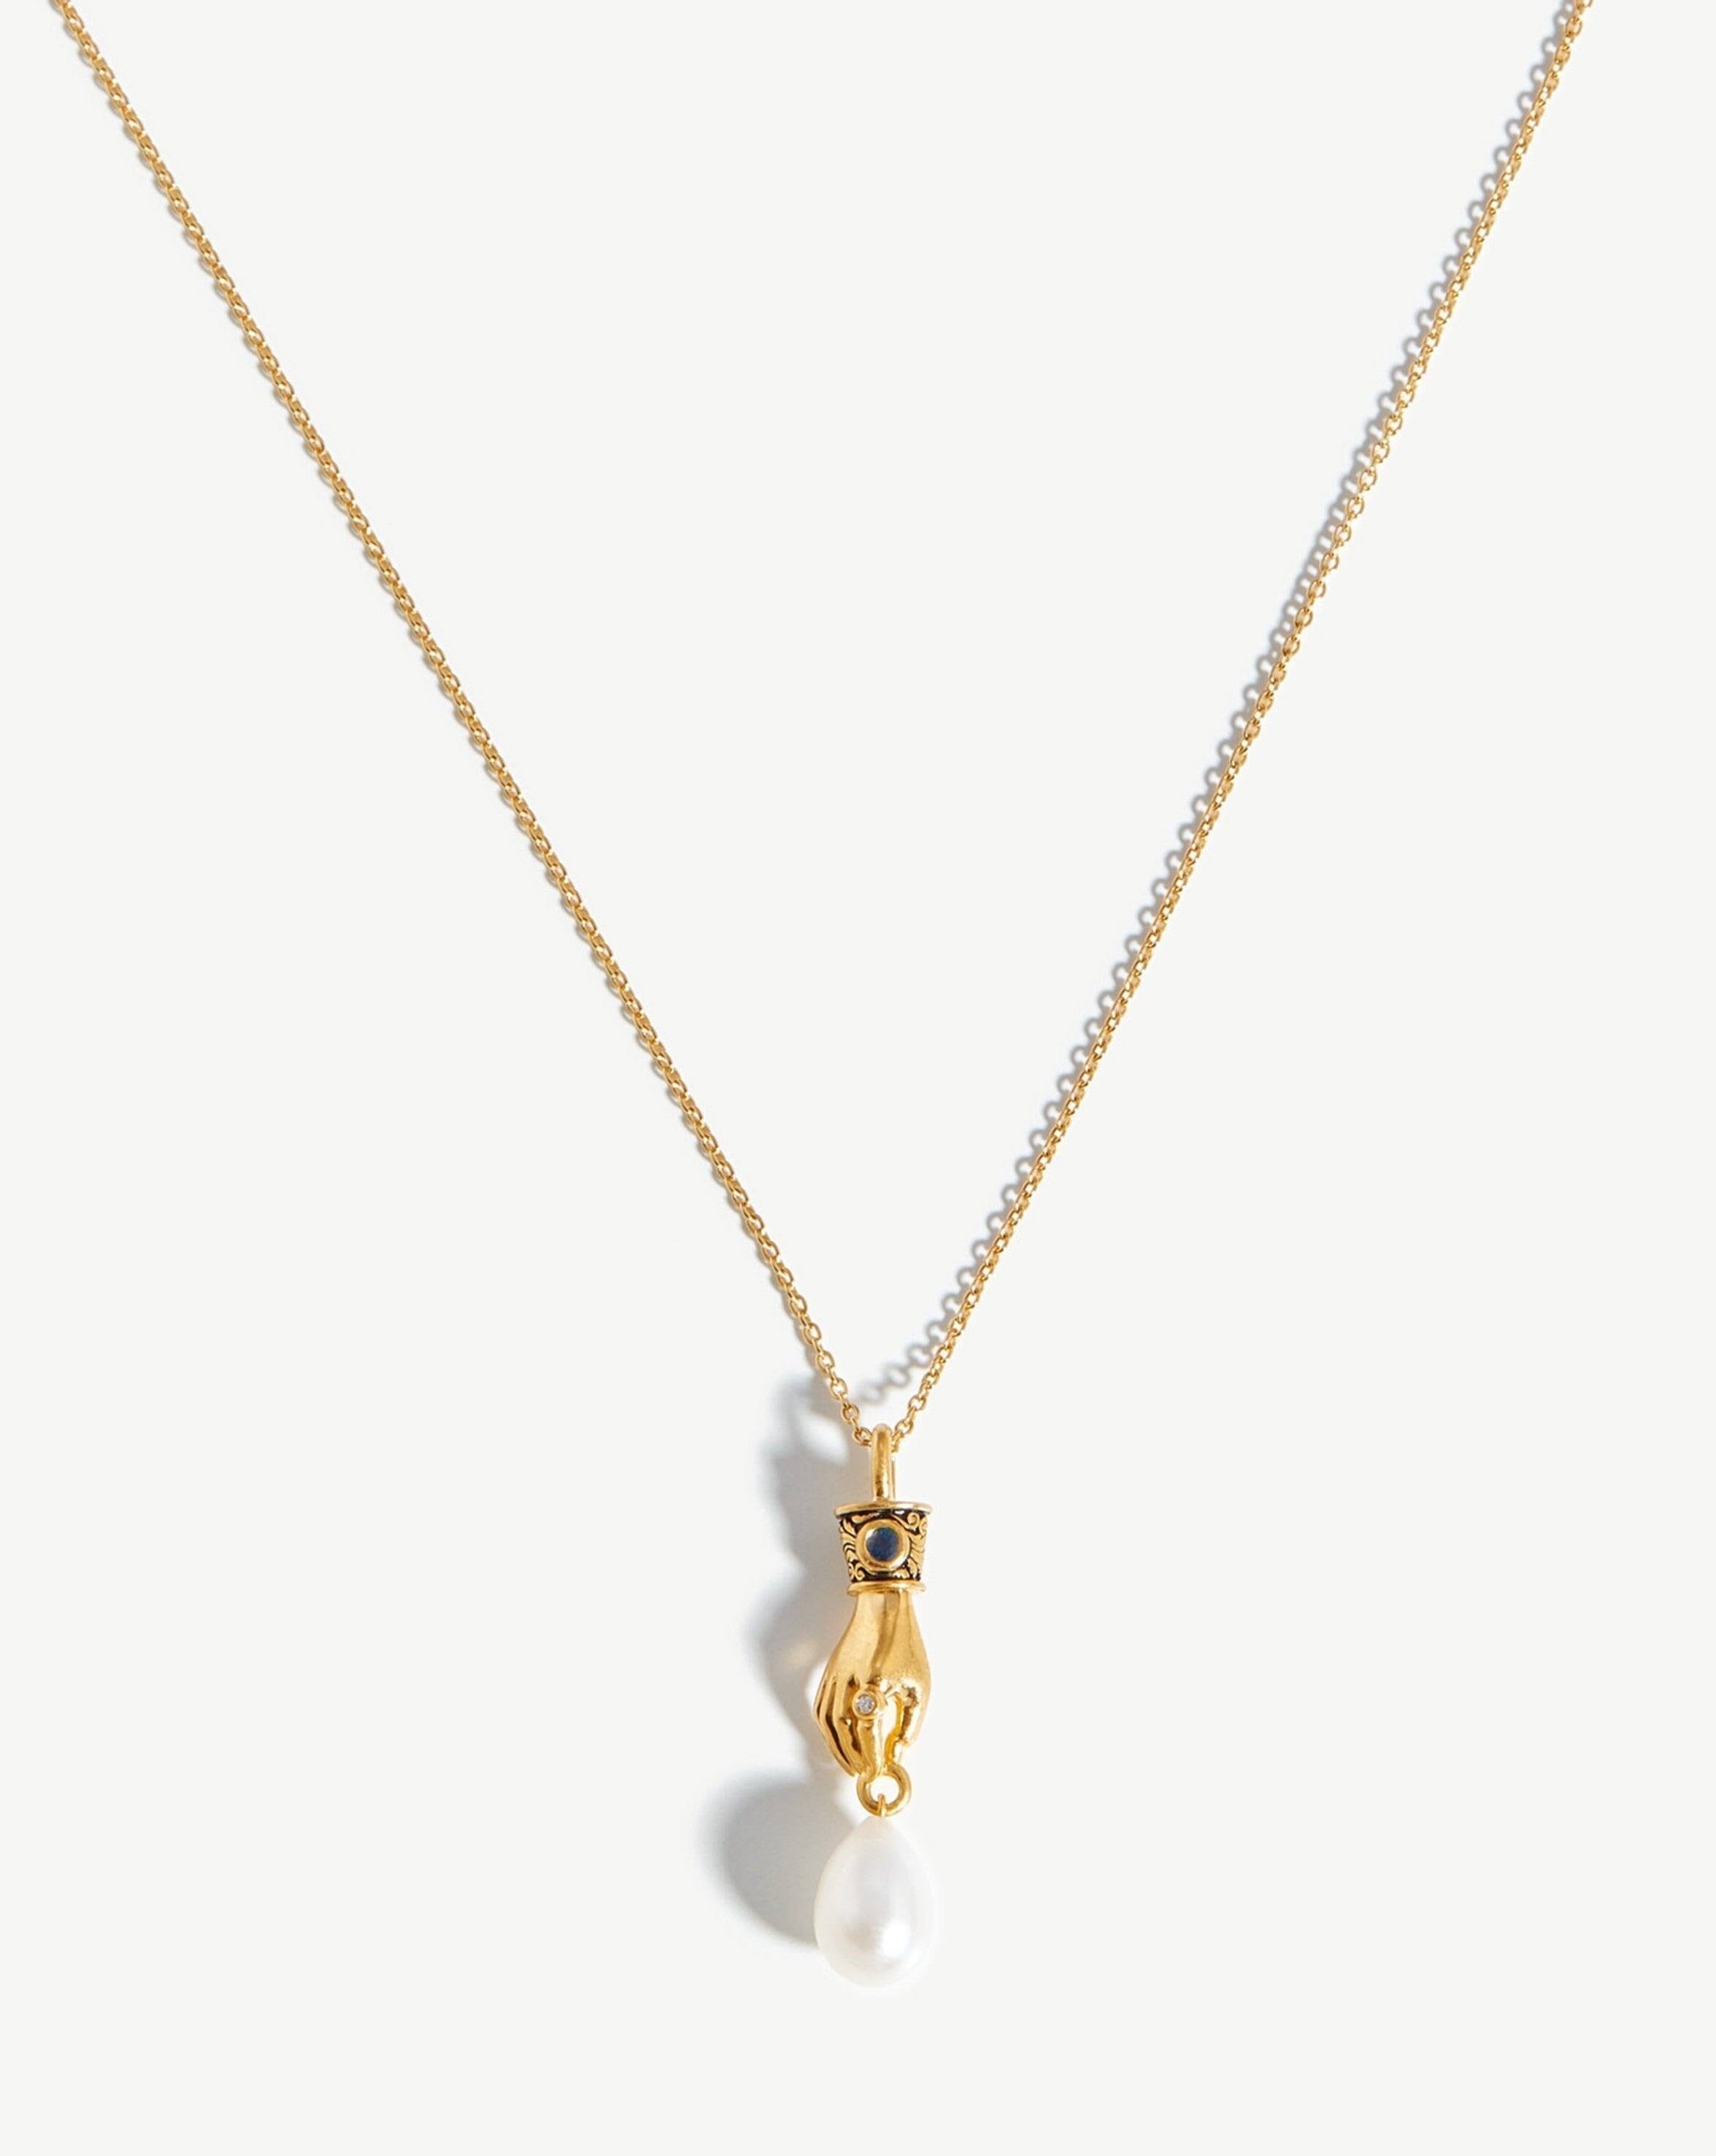 A 14ct Gold Necklace, Centre Two Tone Crescent Panel in the Form of a  Graduated Chain and Mounted to